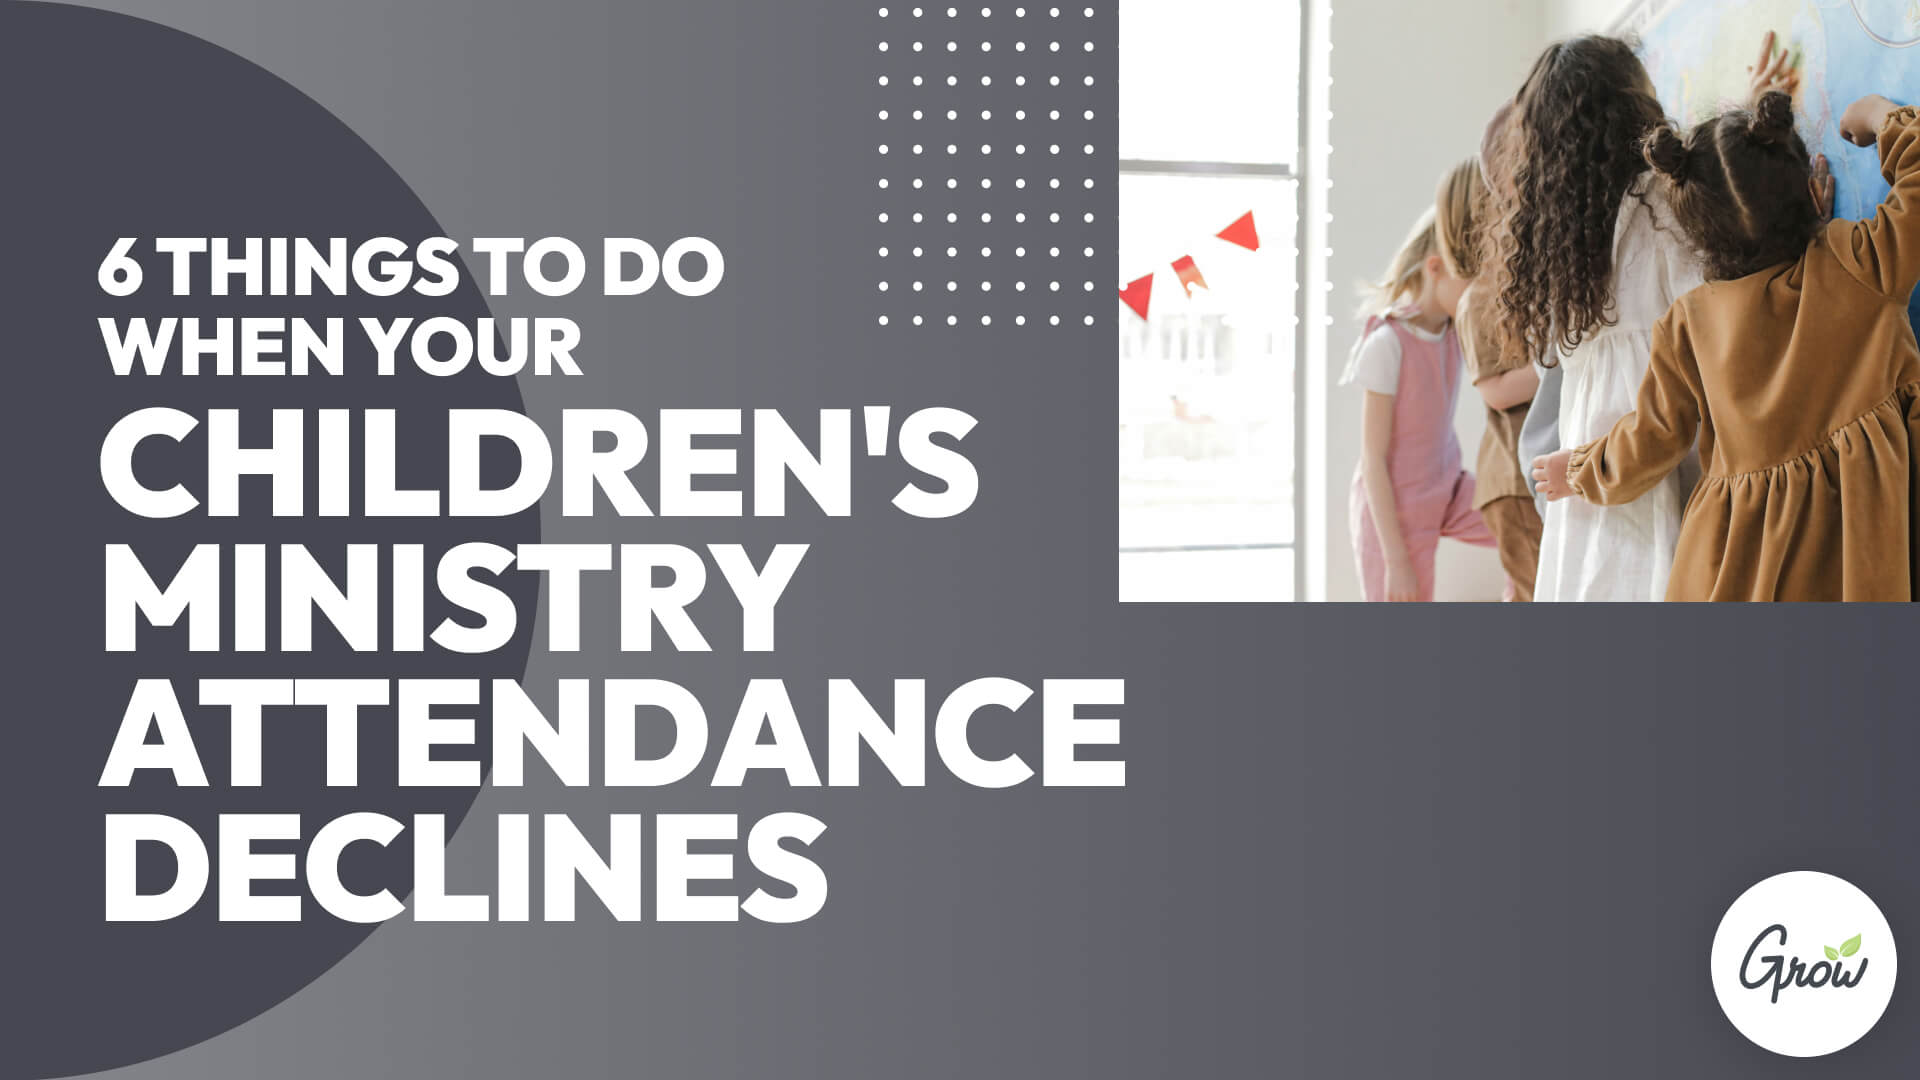 6 Things To Do When Your Children's Ministry Attendance Declines